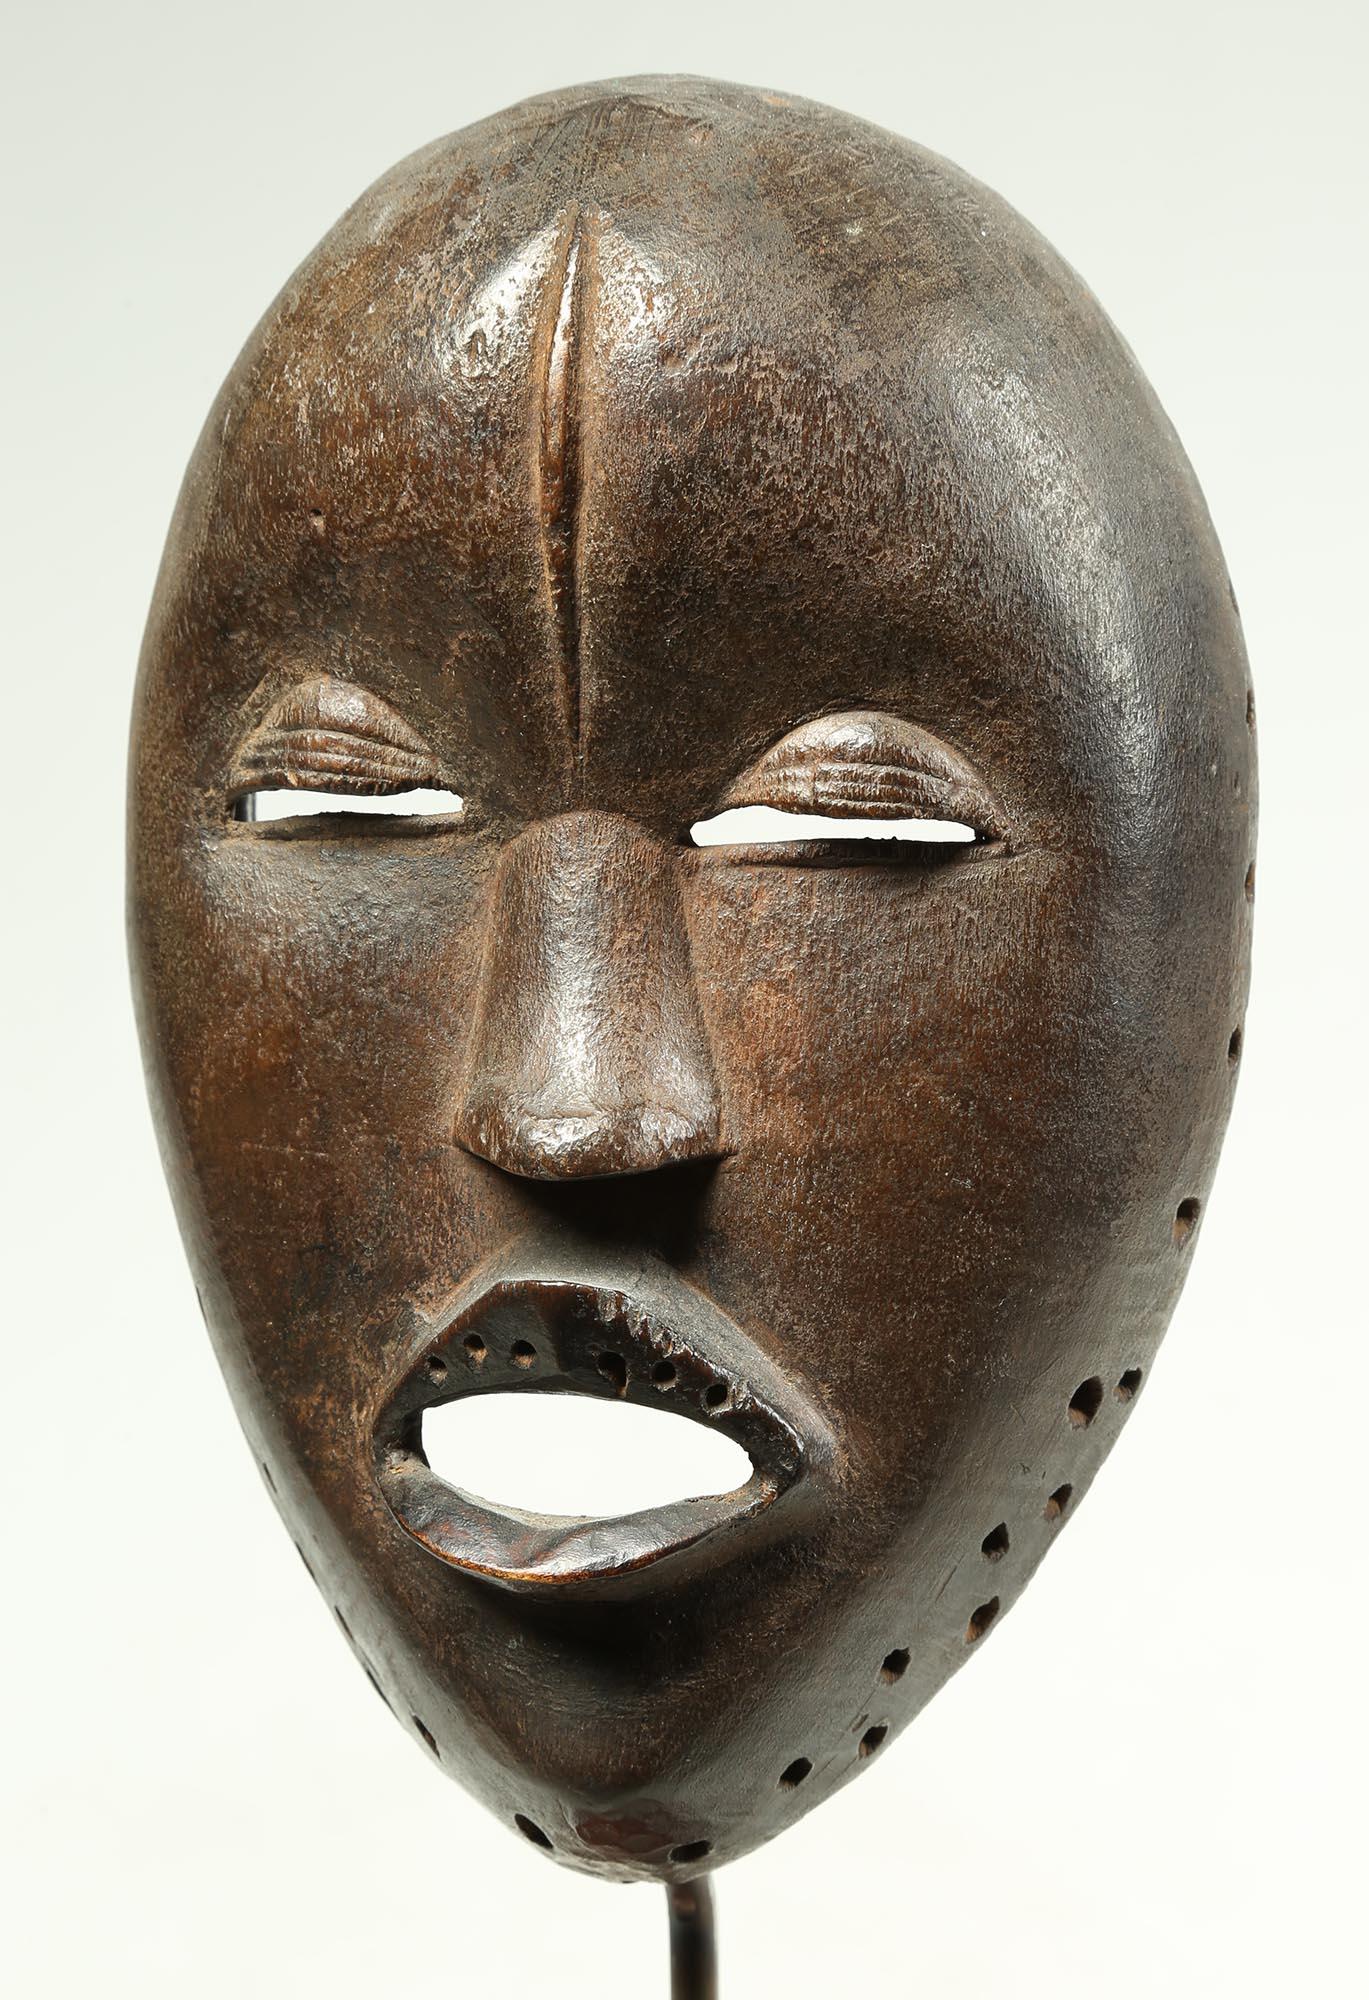 Old expressive Dan mask with open mouth as if speaking or singing, with heavy eyelids as if lost in a trance. Holes around mouth once held inserted teeth, now missing. Small holes around rim for attachment of dance costume. Created in the early 20th